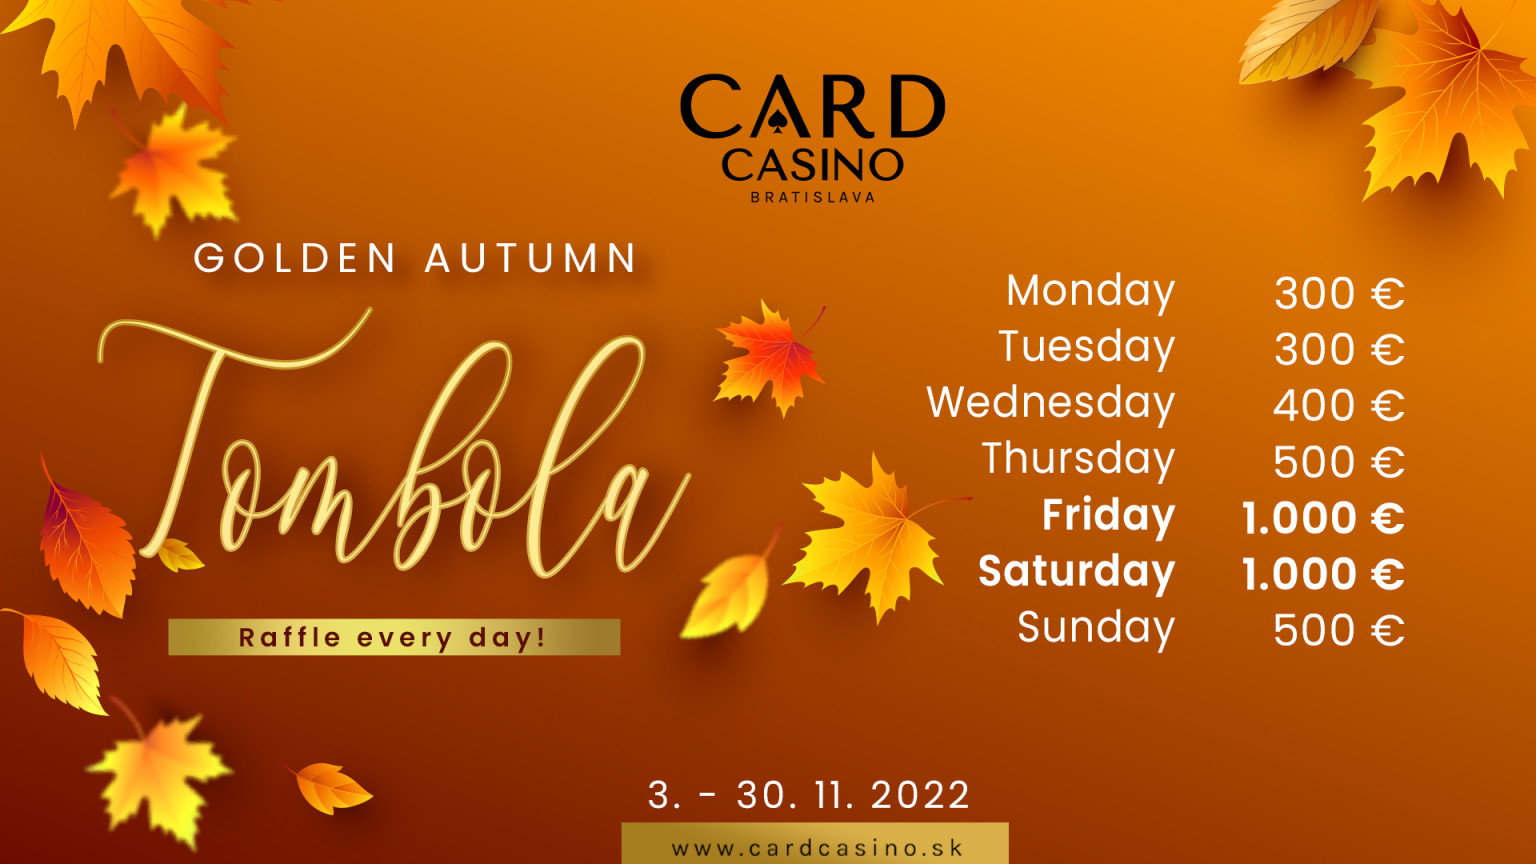 Enjoy the Golden Autumn in Carde with great rewards